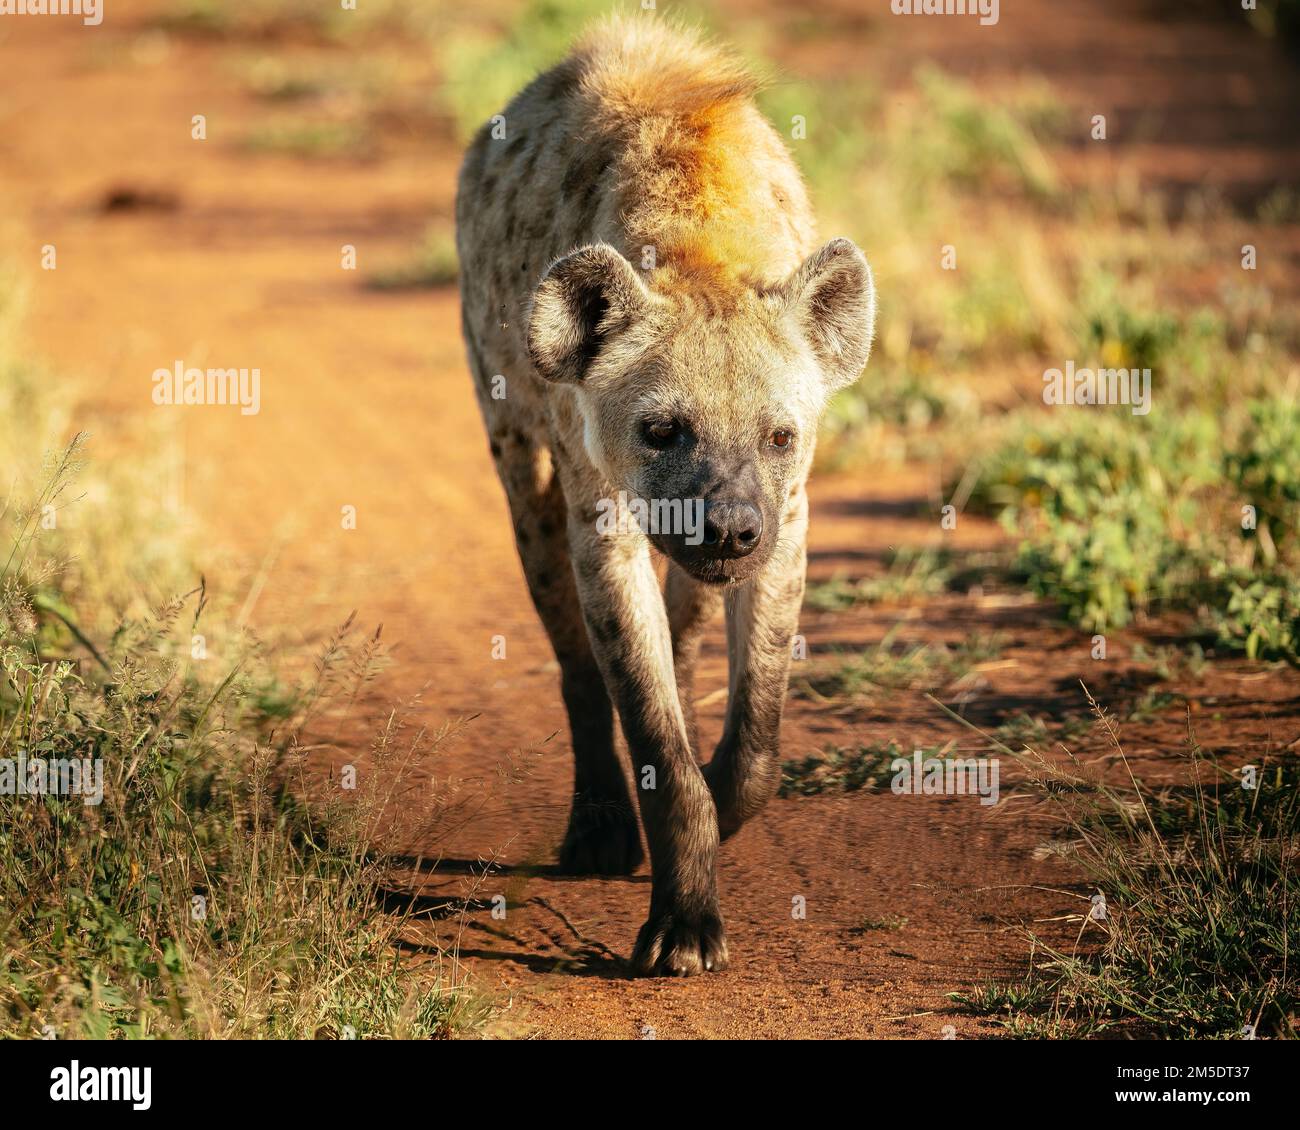 Hyena, Timbavati Private Nature Reserve, Kruger National Park, South Africa Stock Photo